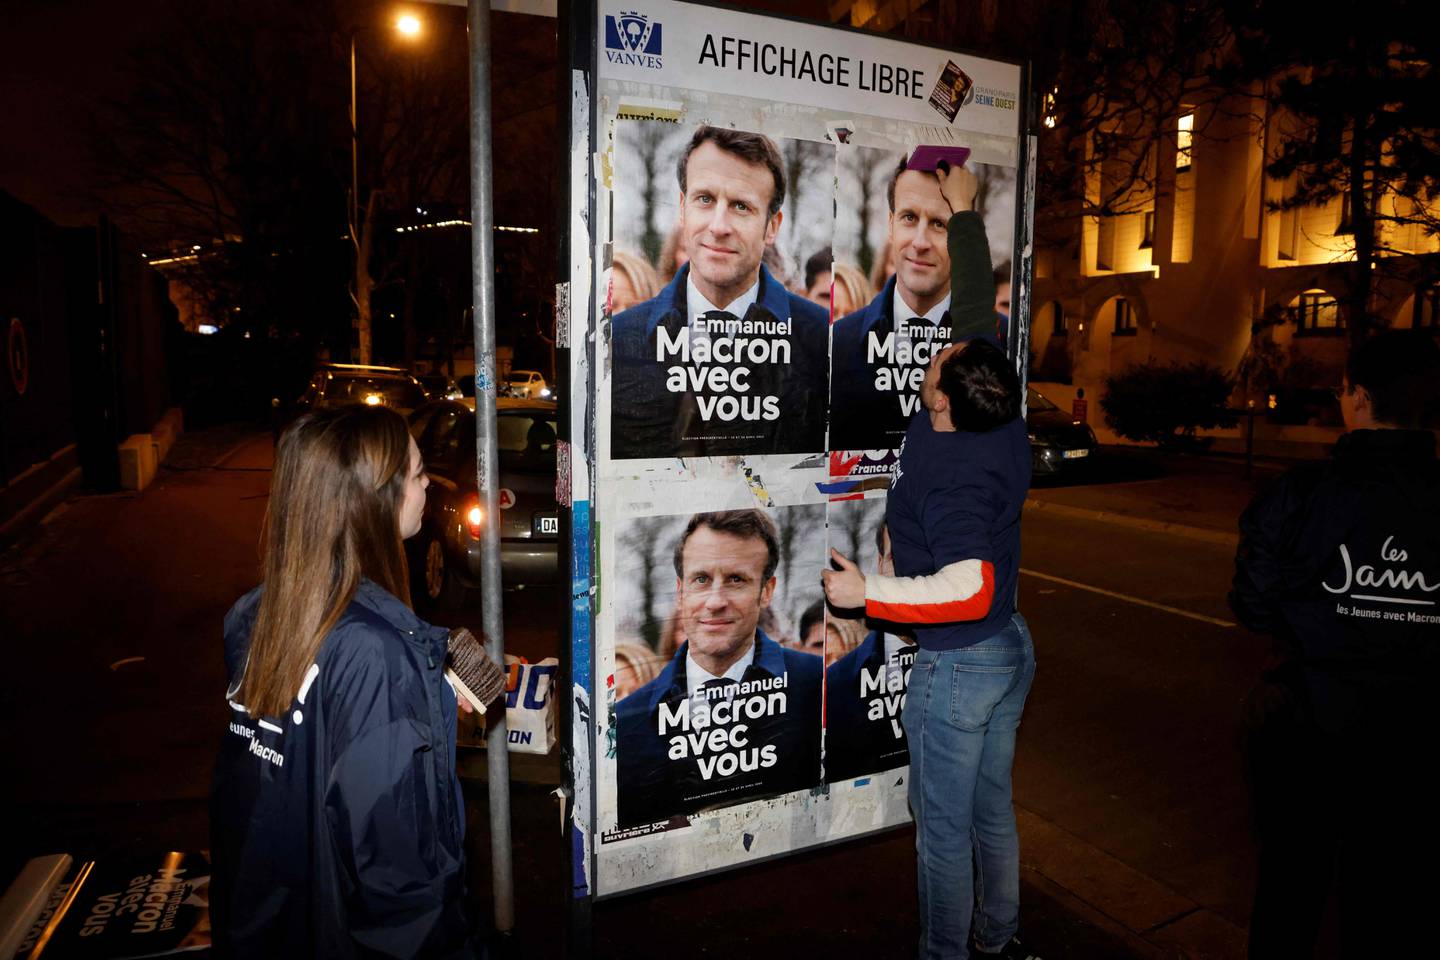 Supporters of French President Emmanuel Macron stick his campaign posters in Vanves, outside Paris, on Wednesday. AFP